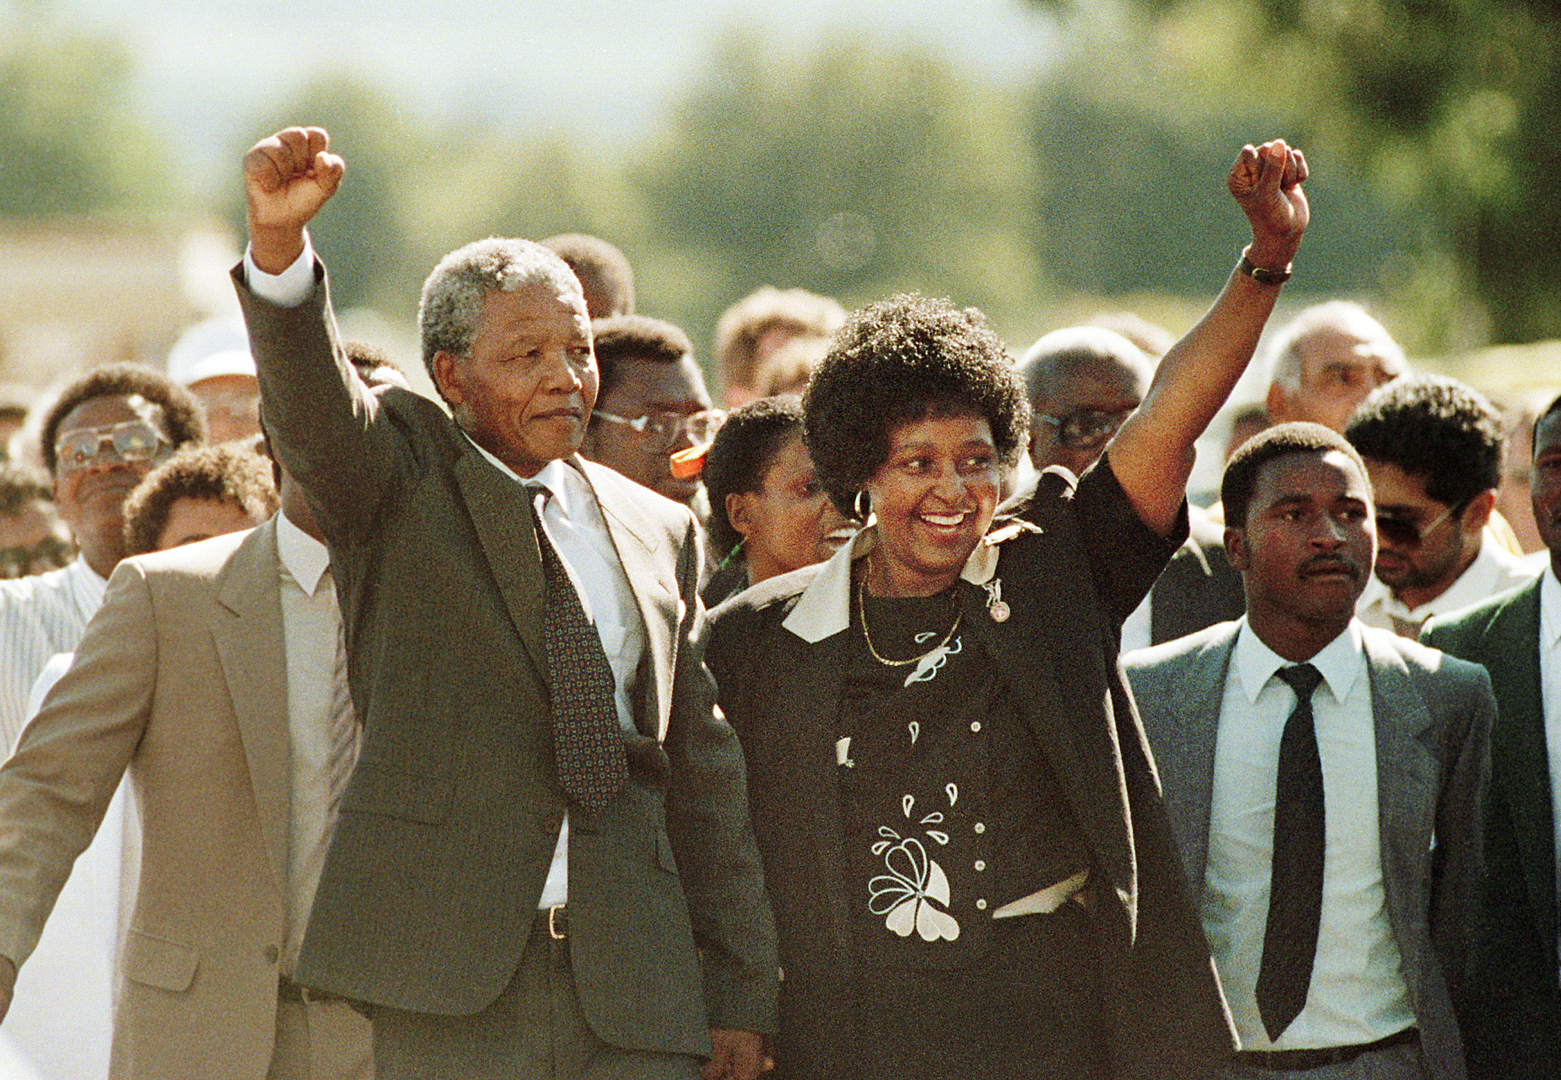 <p>In a speech delivered on 2 February, P.W. Botha’s successor, F.W. de Klerk, unbans the leading liberation movements and enters into “talks about talks” aimed at transforming South Africa. On 11 February, Nelson Mandela is released from Victor Verster prison.</p>